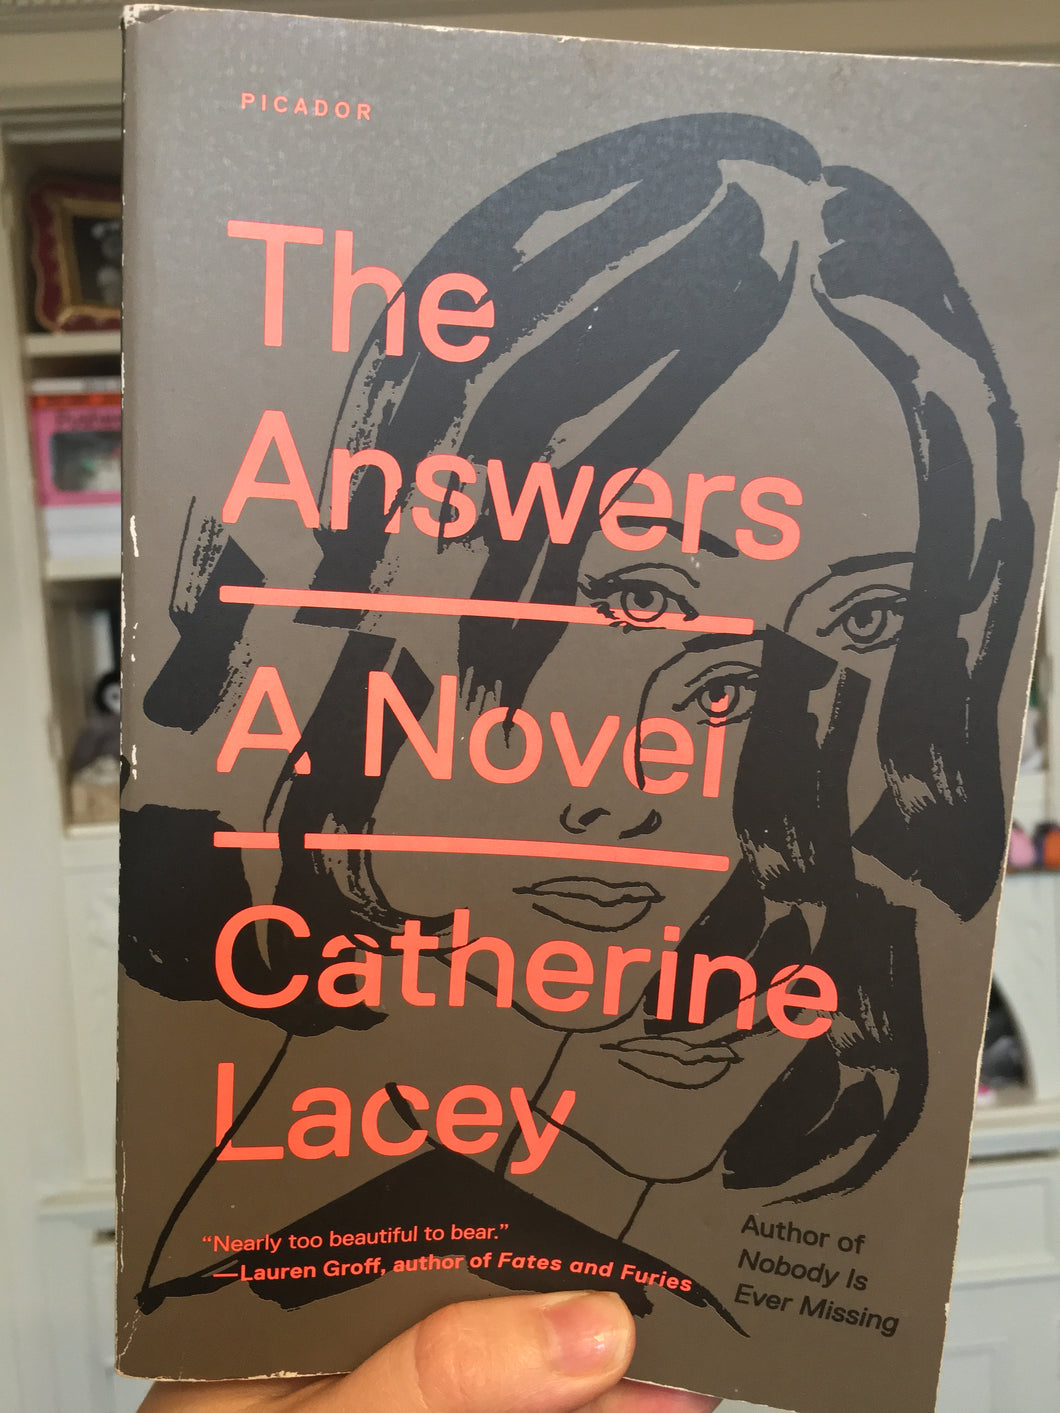 The Answers: A Novel by Catherine Lacey